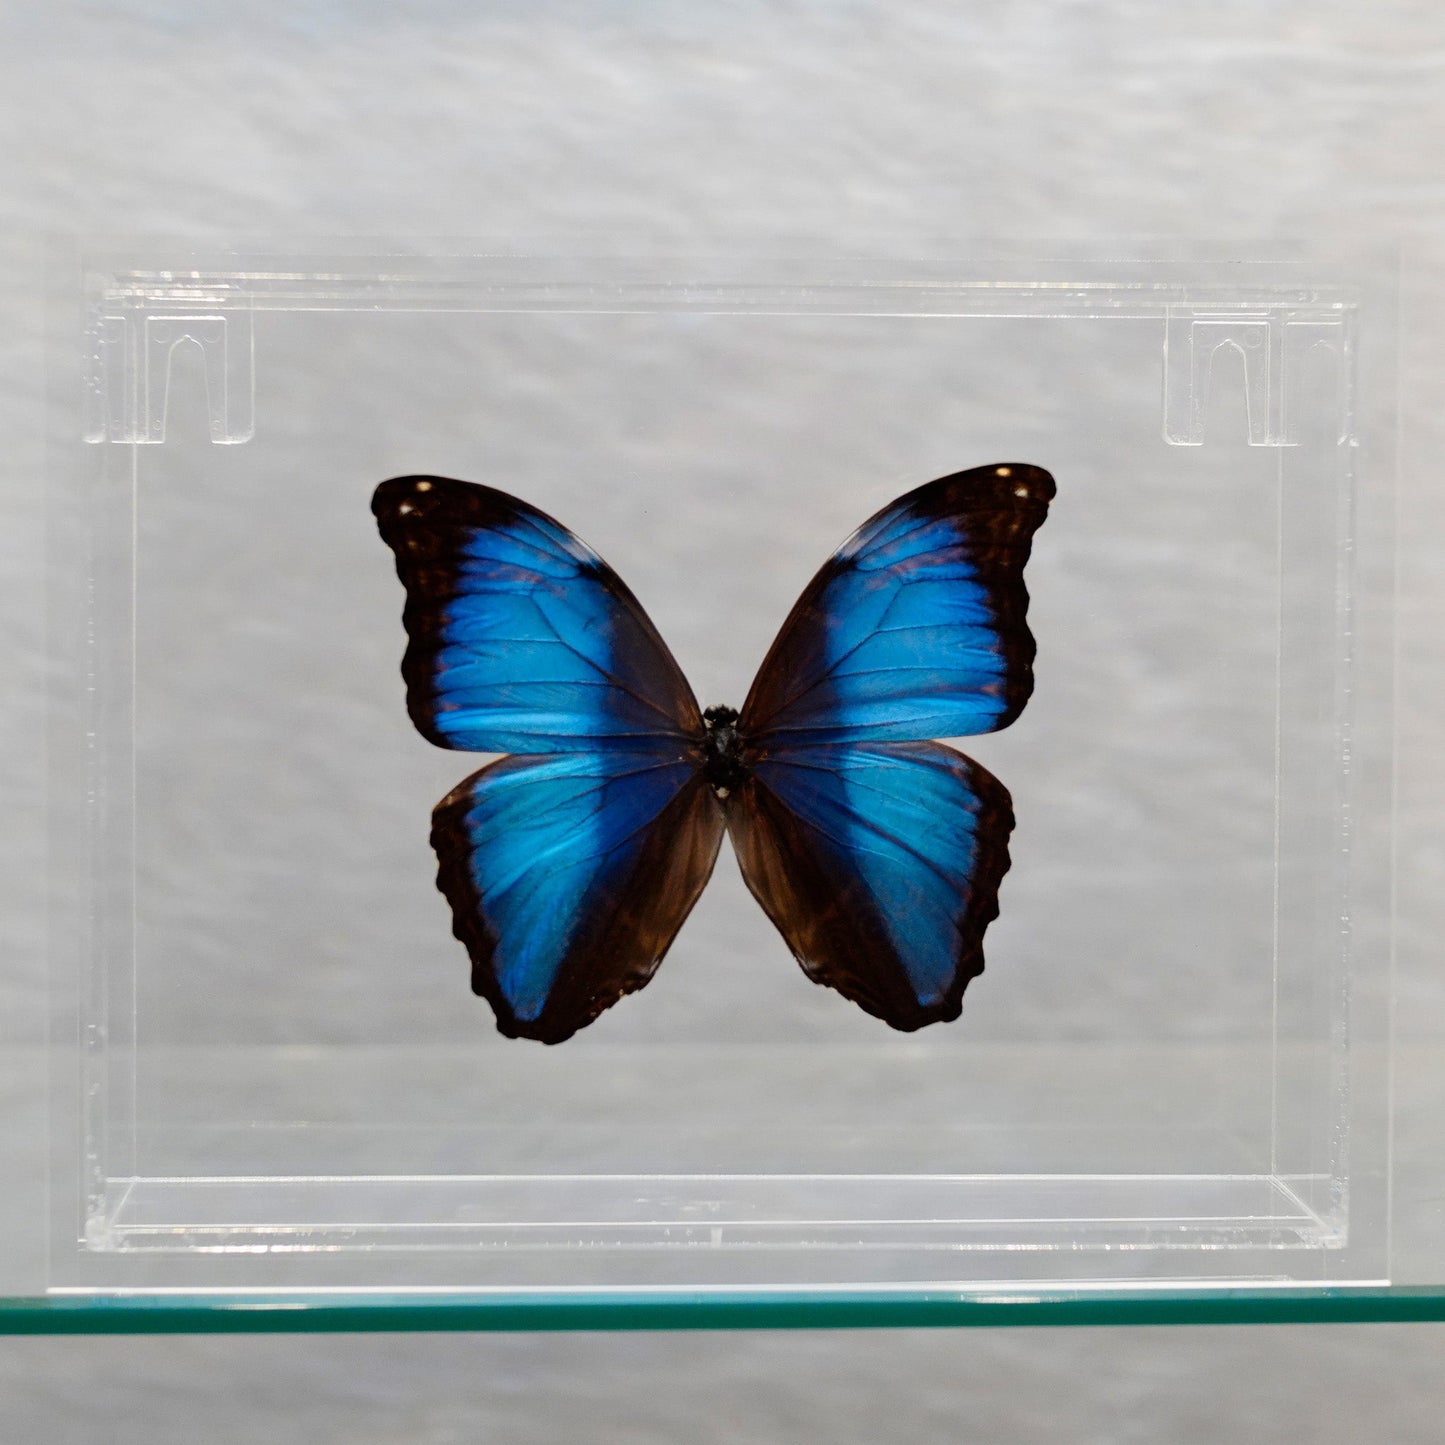 Butterfly in Display Box // Ver. 2